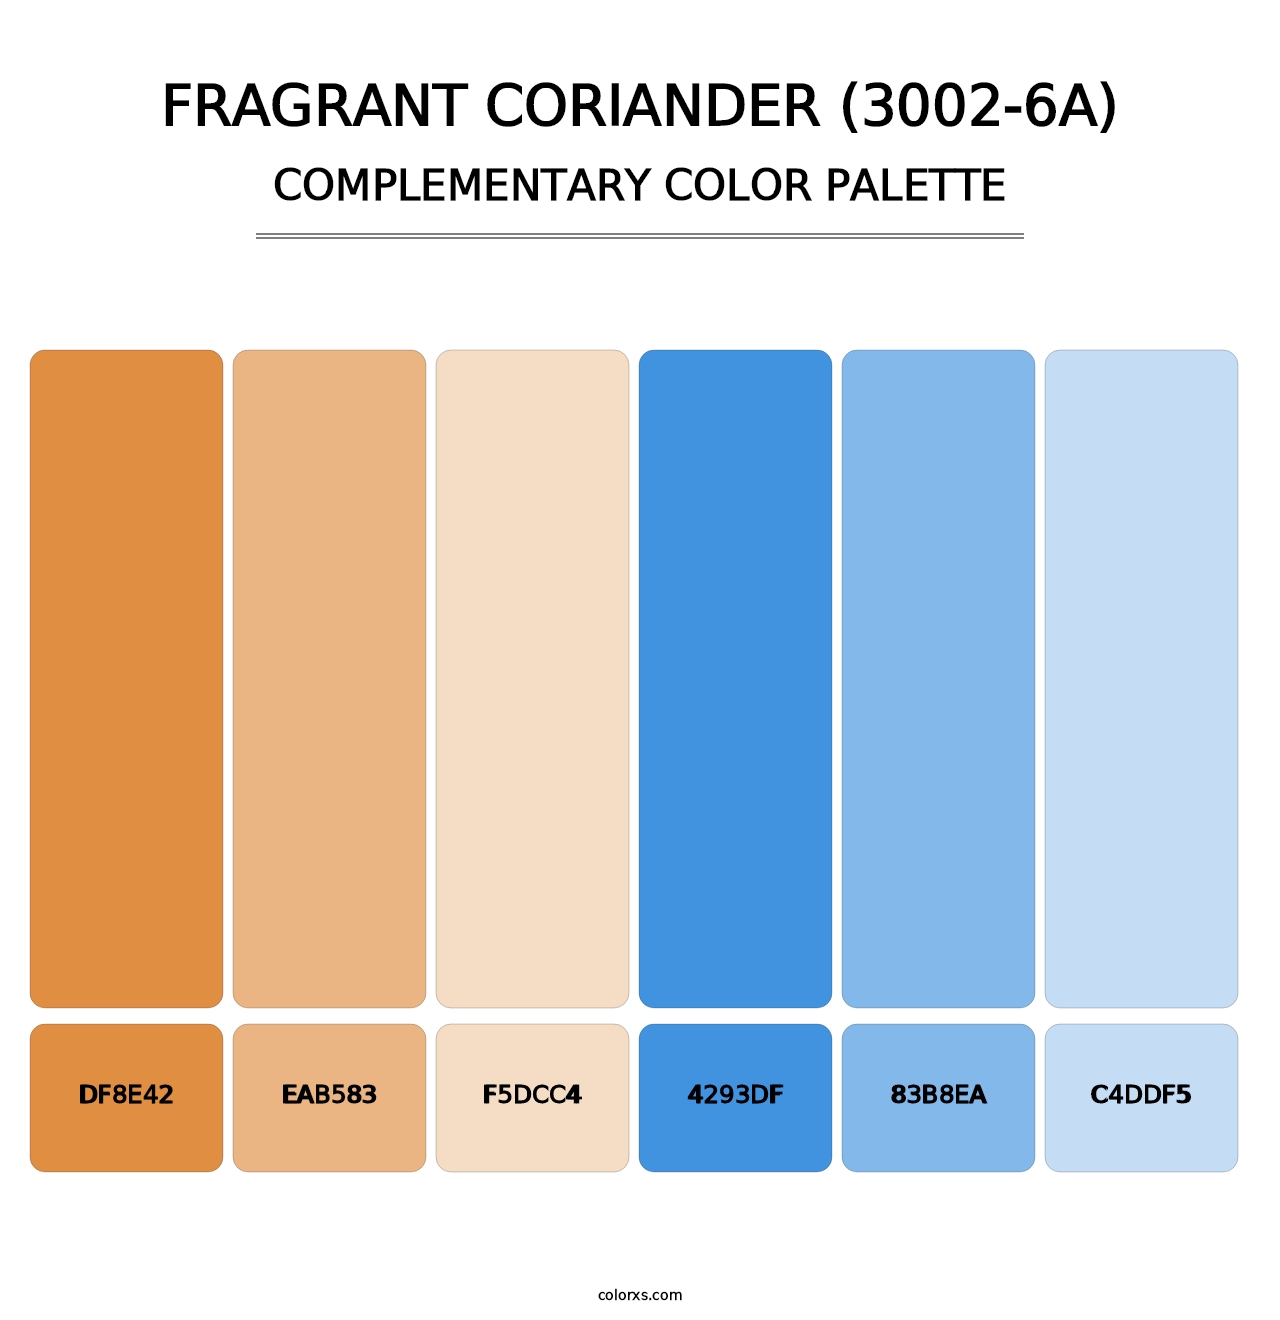 Fragrant Coriander (3002-6A) - Complementary Color Palette